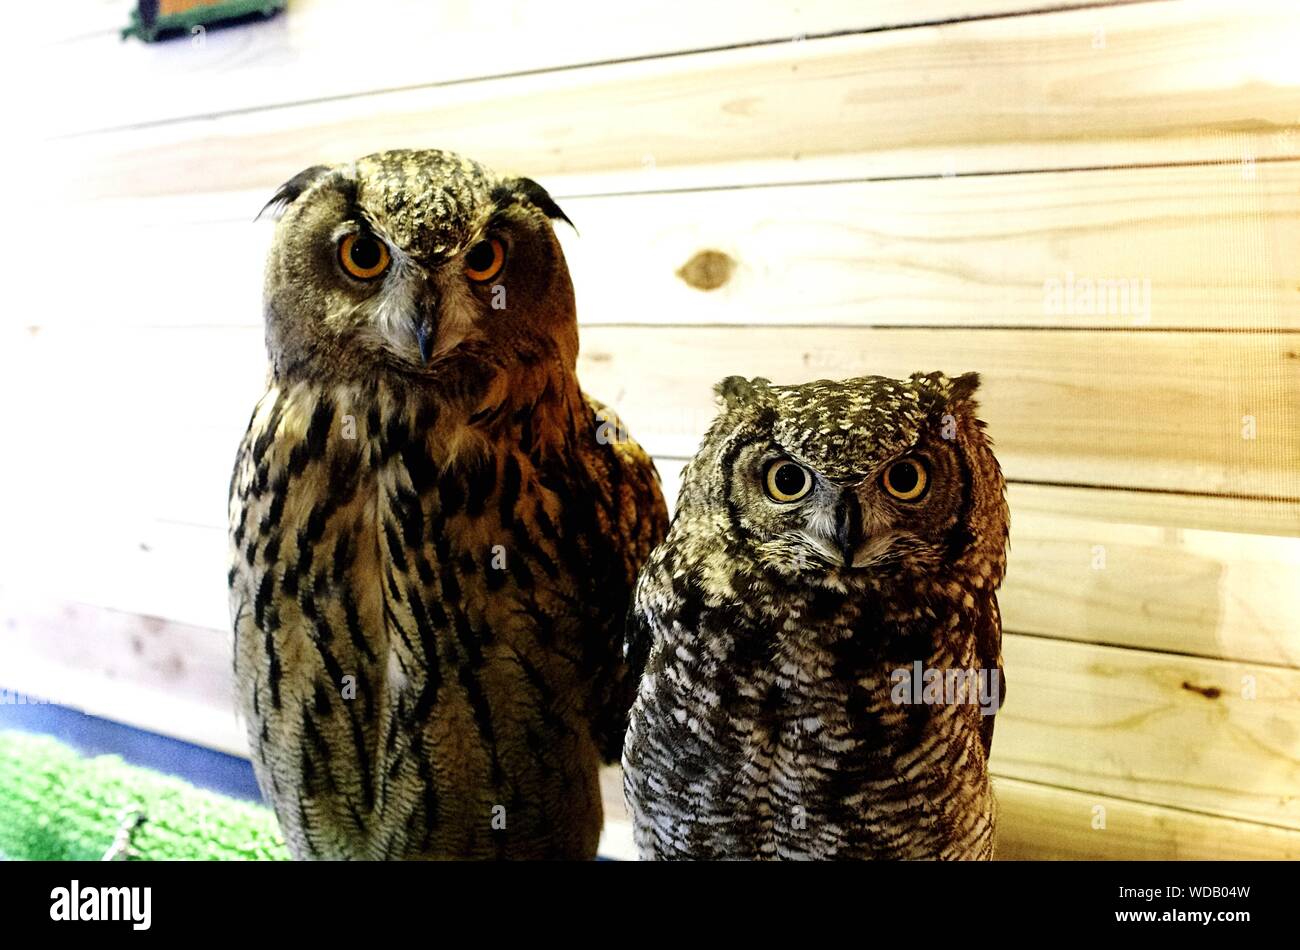 Portrait Of Eagle Owls Against Wall In Cafe Stock Photo